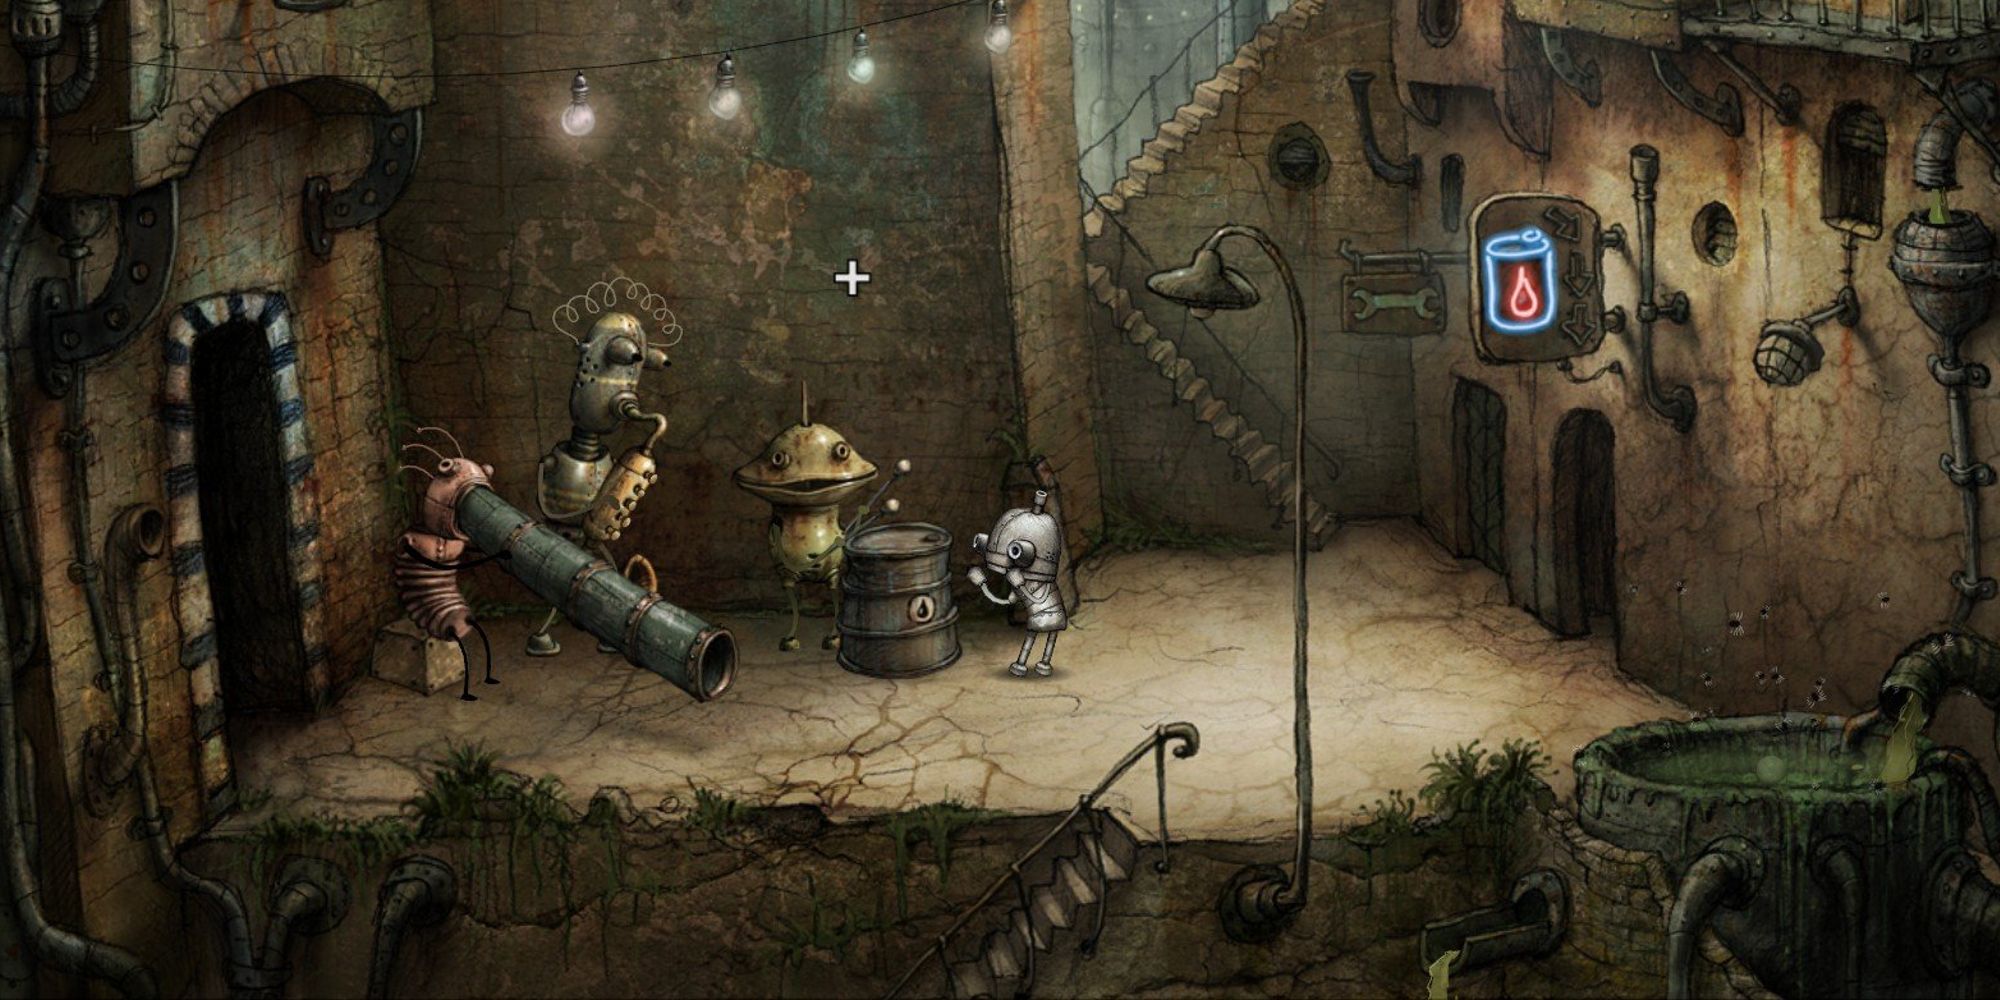 Josef with some street performers in Machinarium